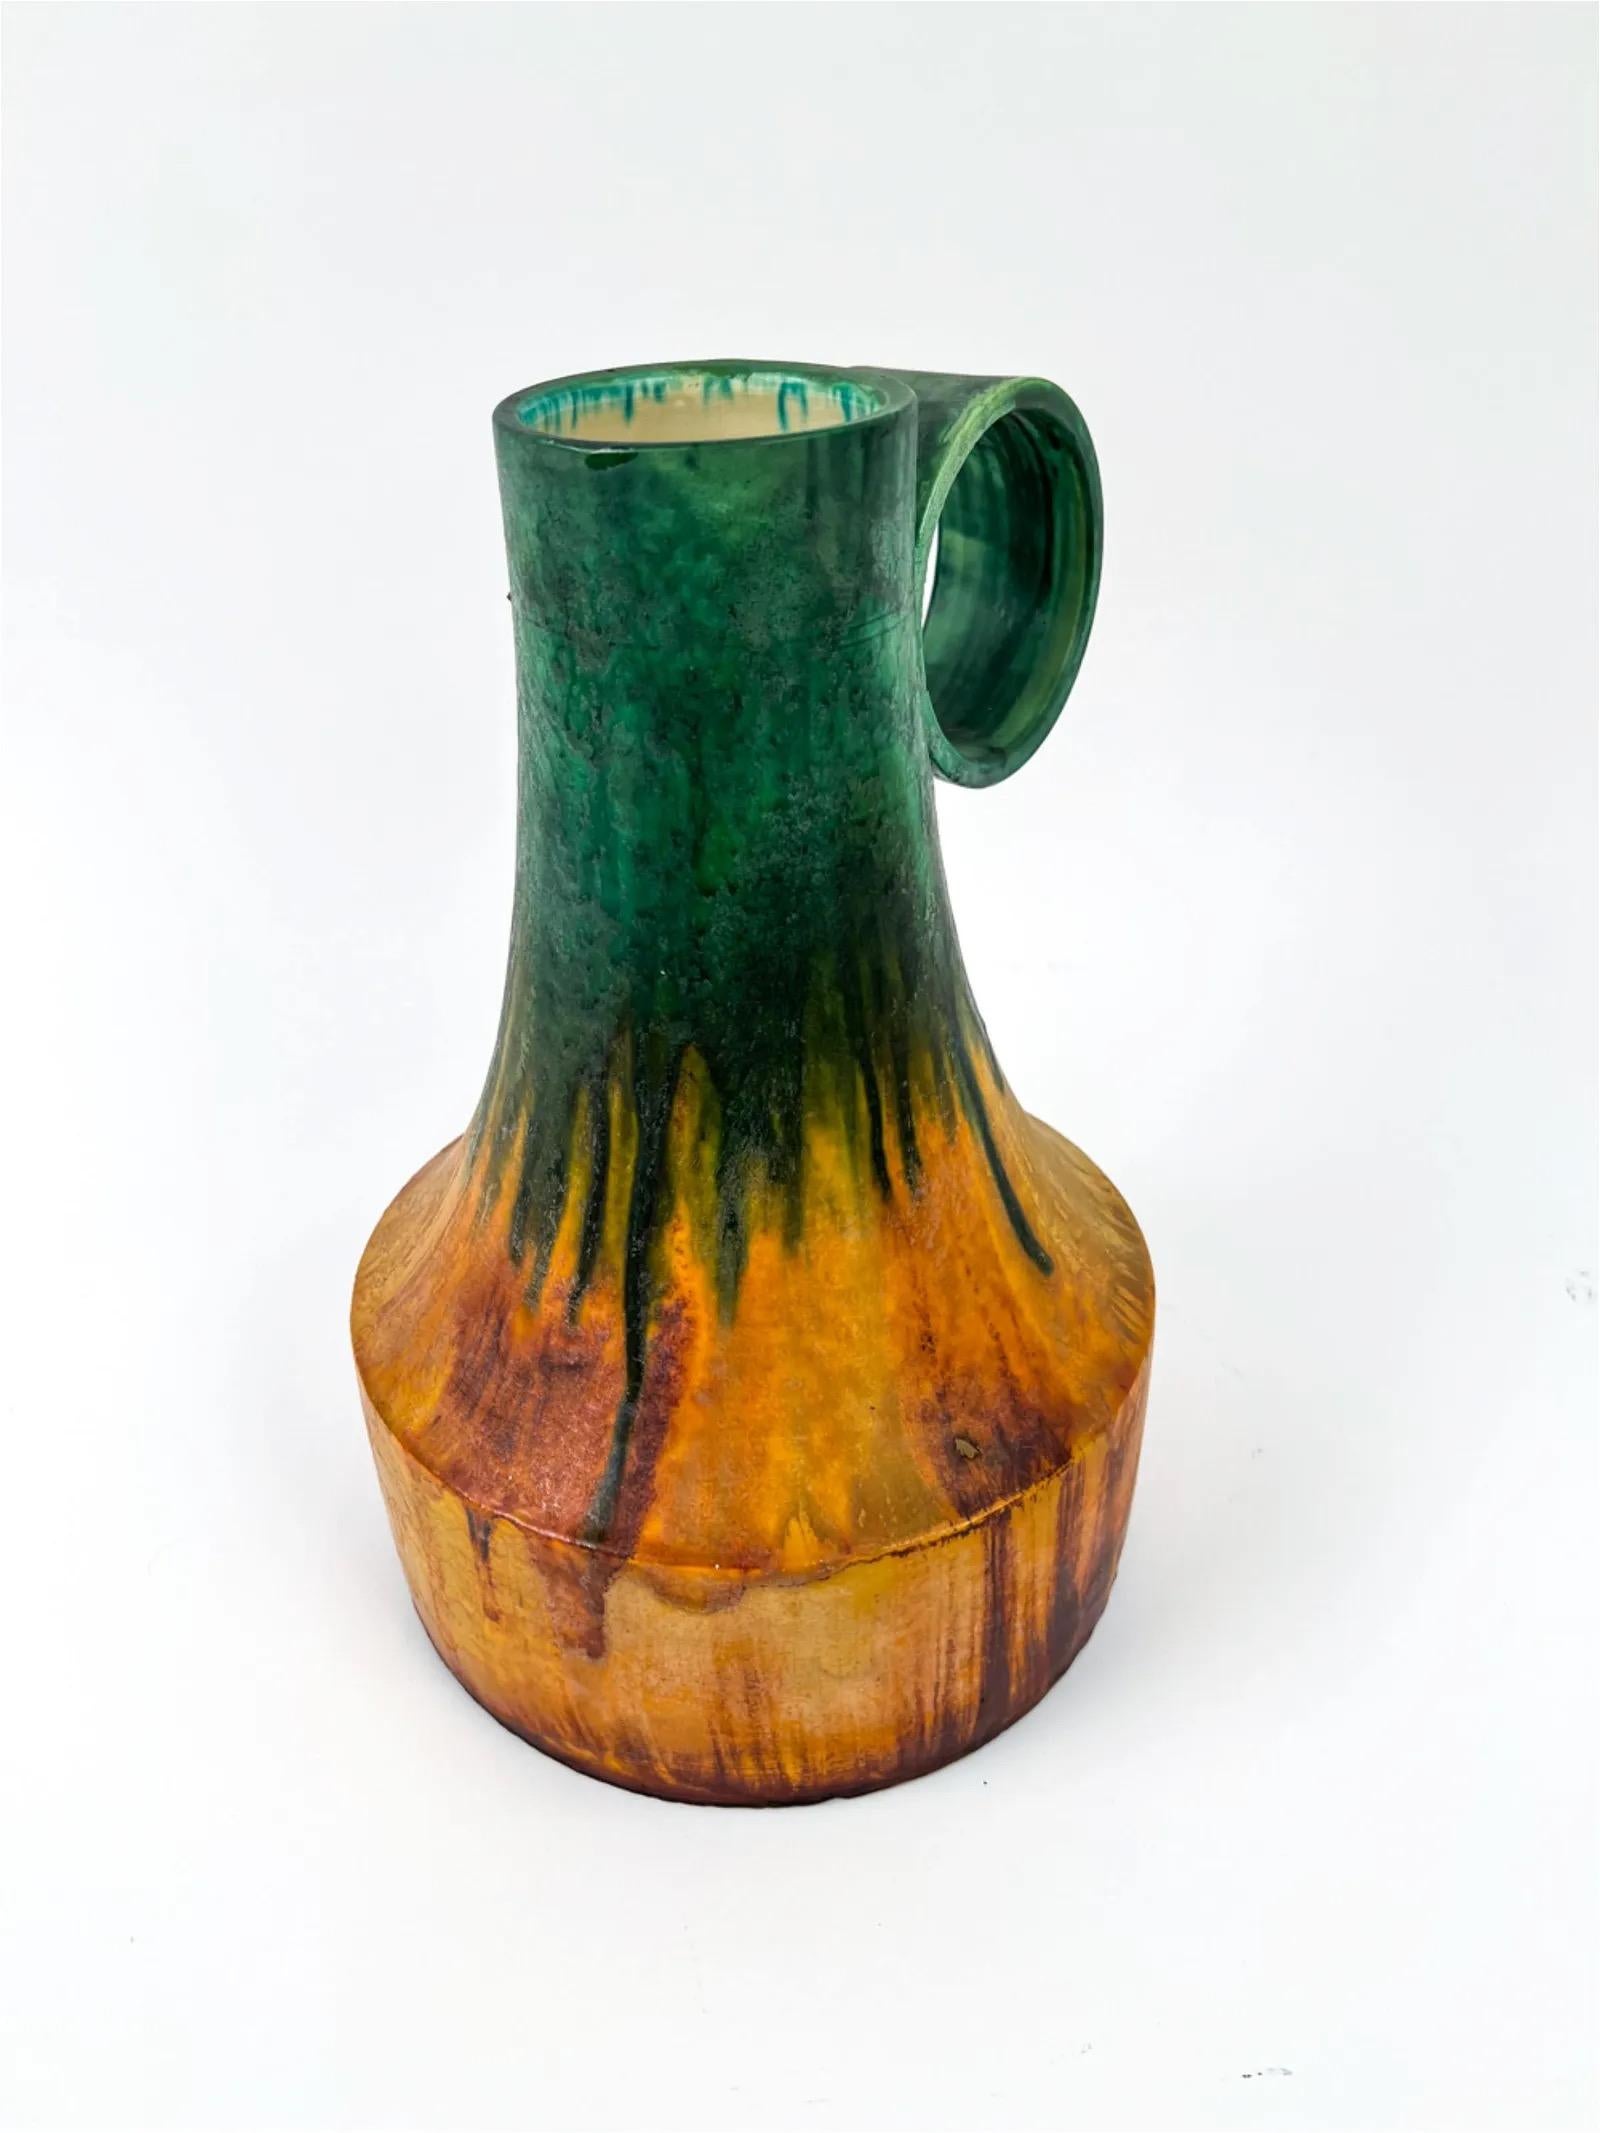 Marcello Fantoni Monumental Tuscan Ewer, Ceramic Vase or Pitcher, Italy In Good Condition For Sale In Brooklyn, NY